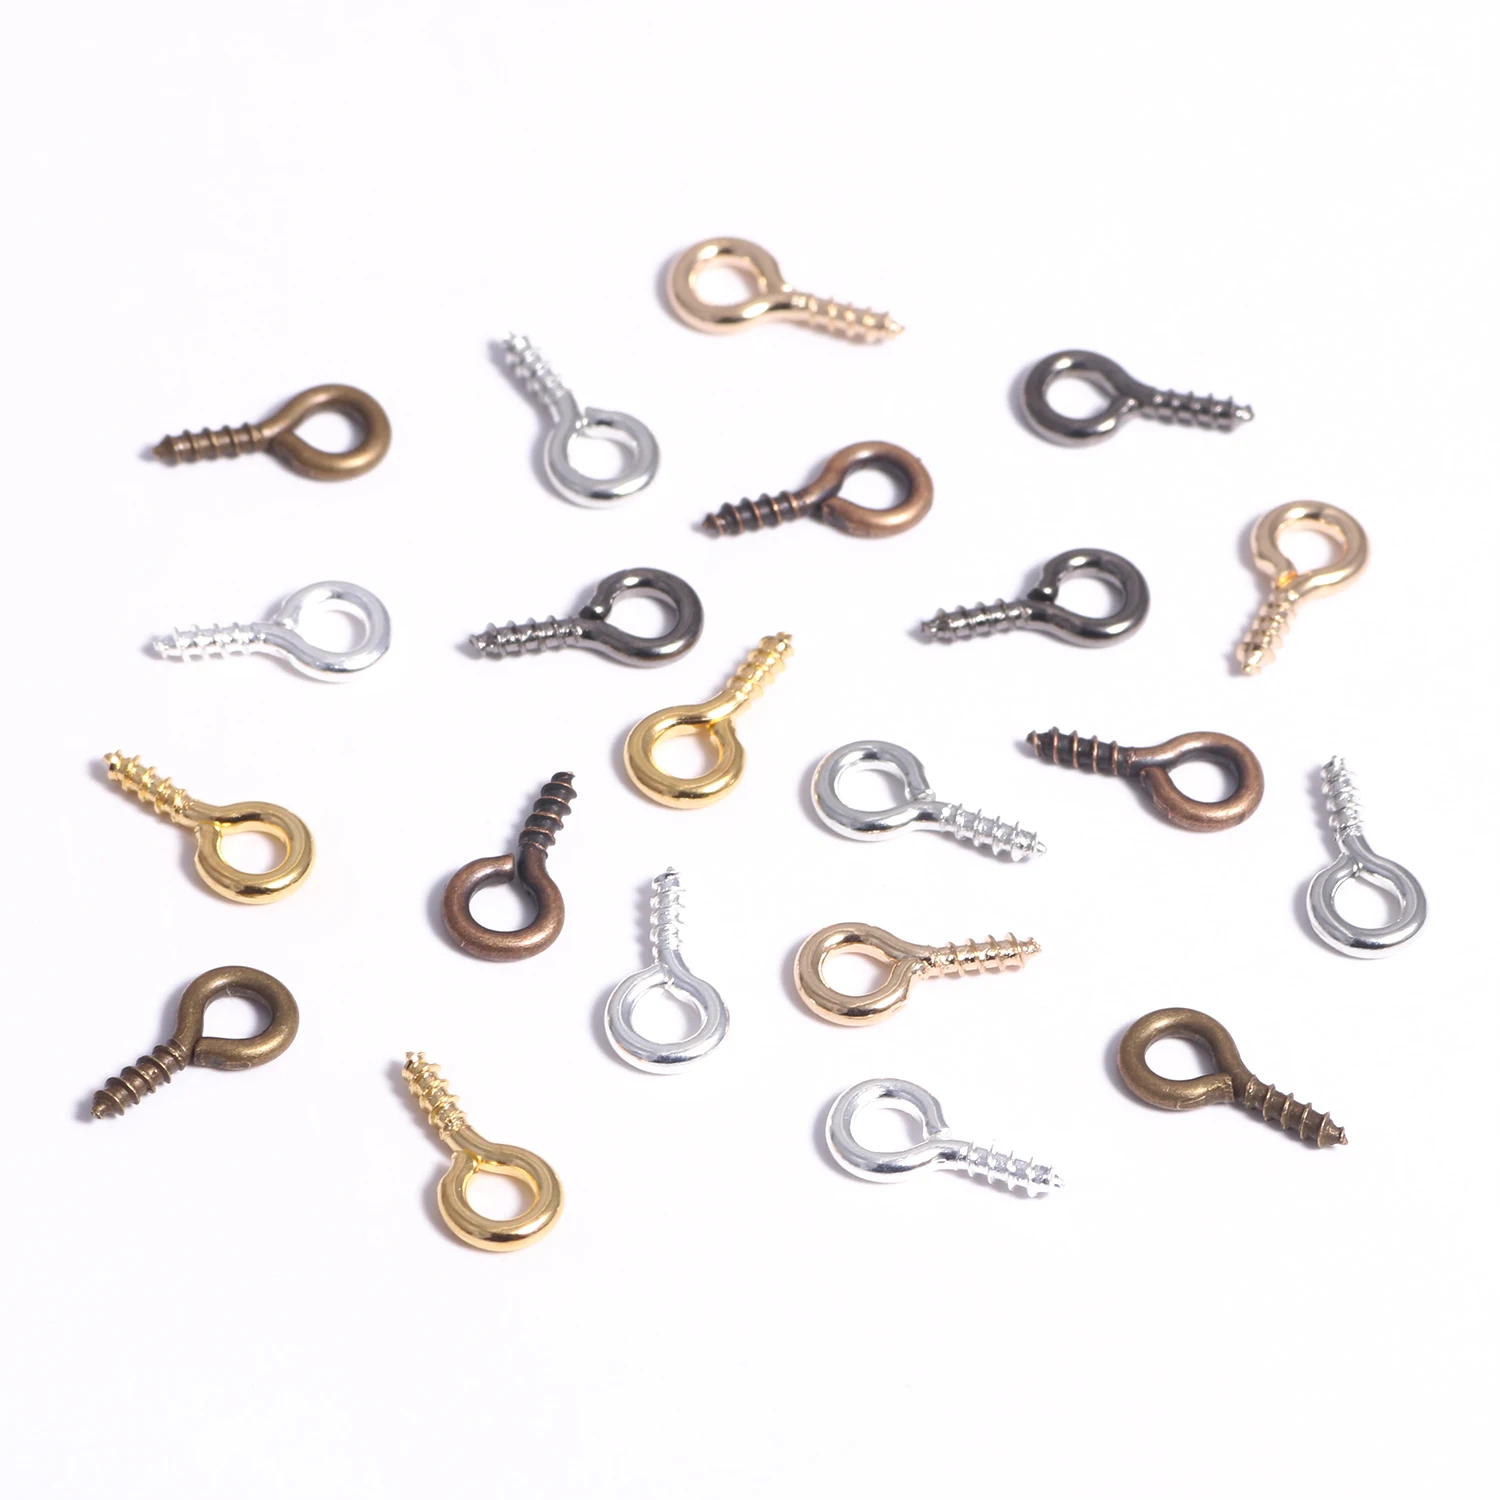 Tiny Mini Eye Pins for Jewelry Making DIY Gold Silver Color Eyepins Hook  Screw Threaded Clasps Hooks Jewelry Findings Accessory - AliExpress